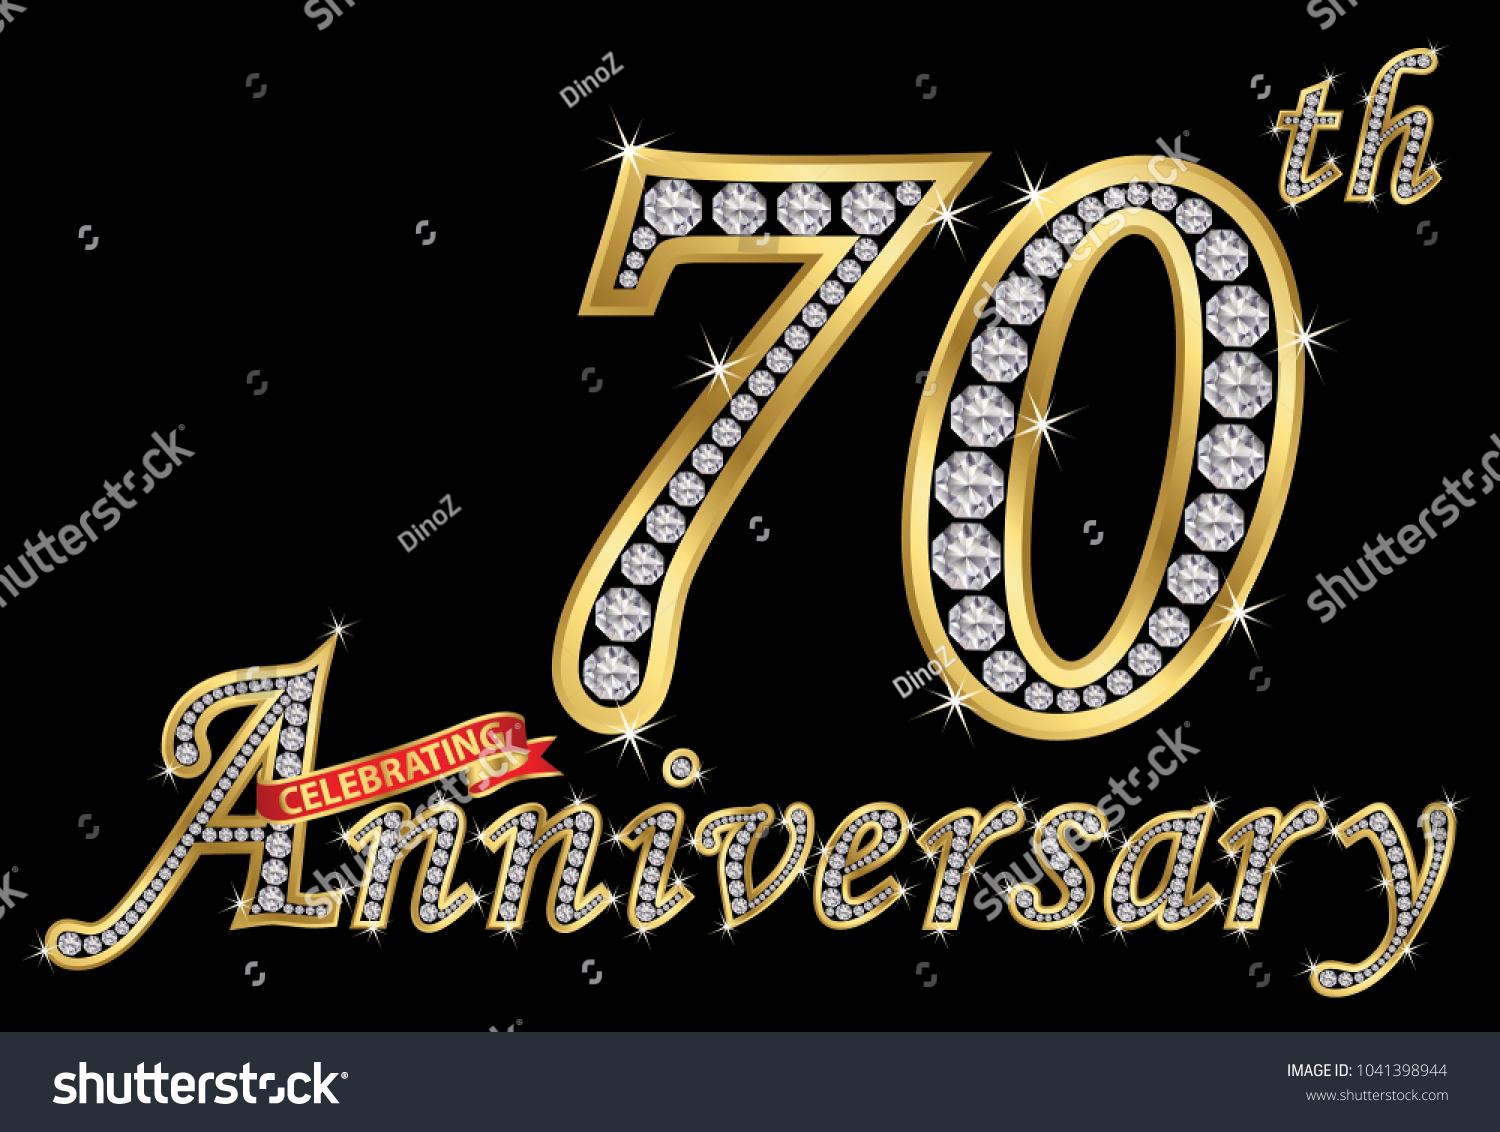 SVG of Celebrating  70th anniversary golden sign with diamonds, vector illustration svg